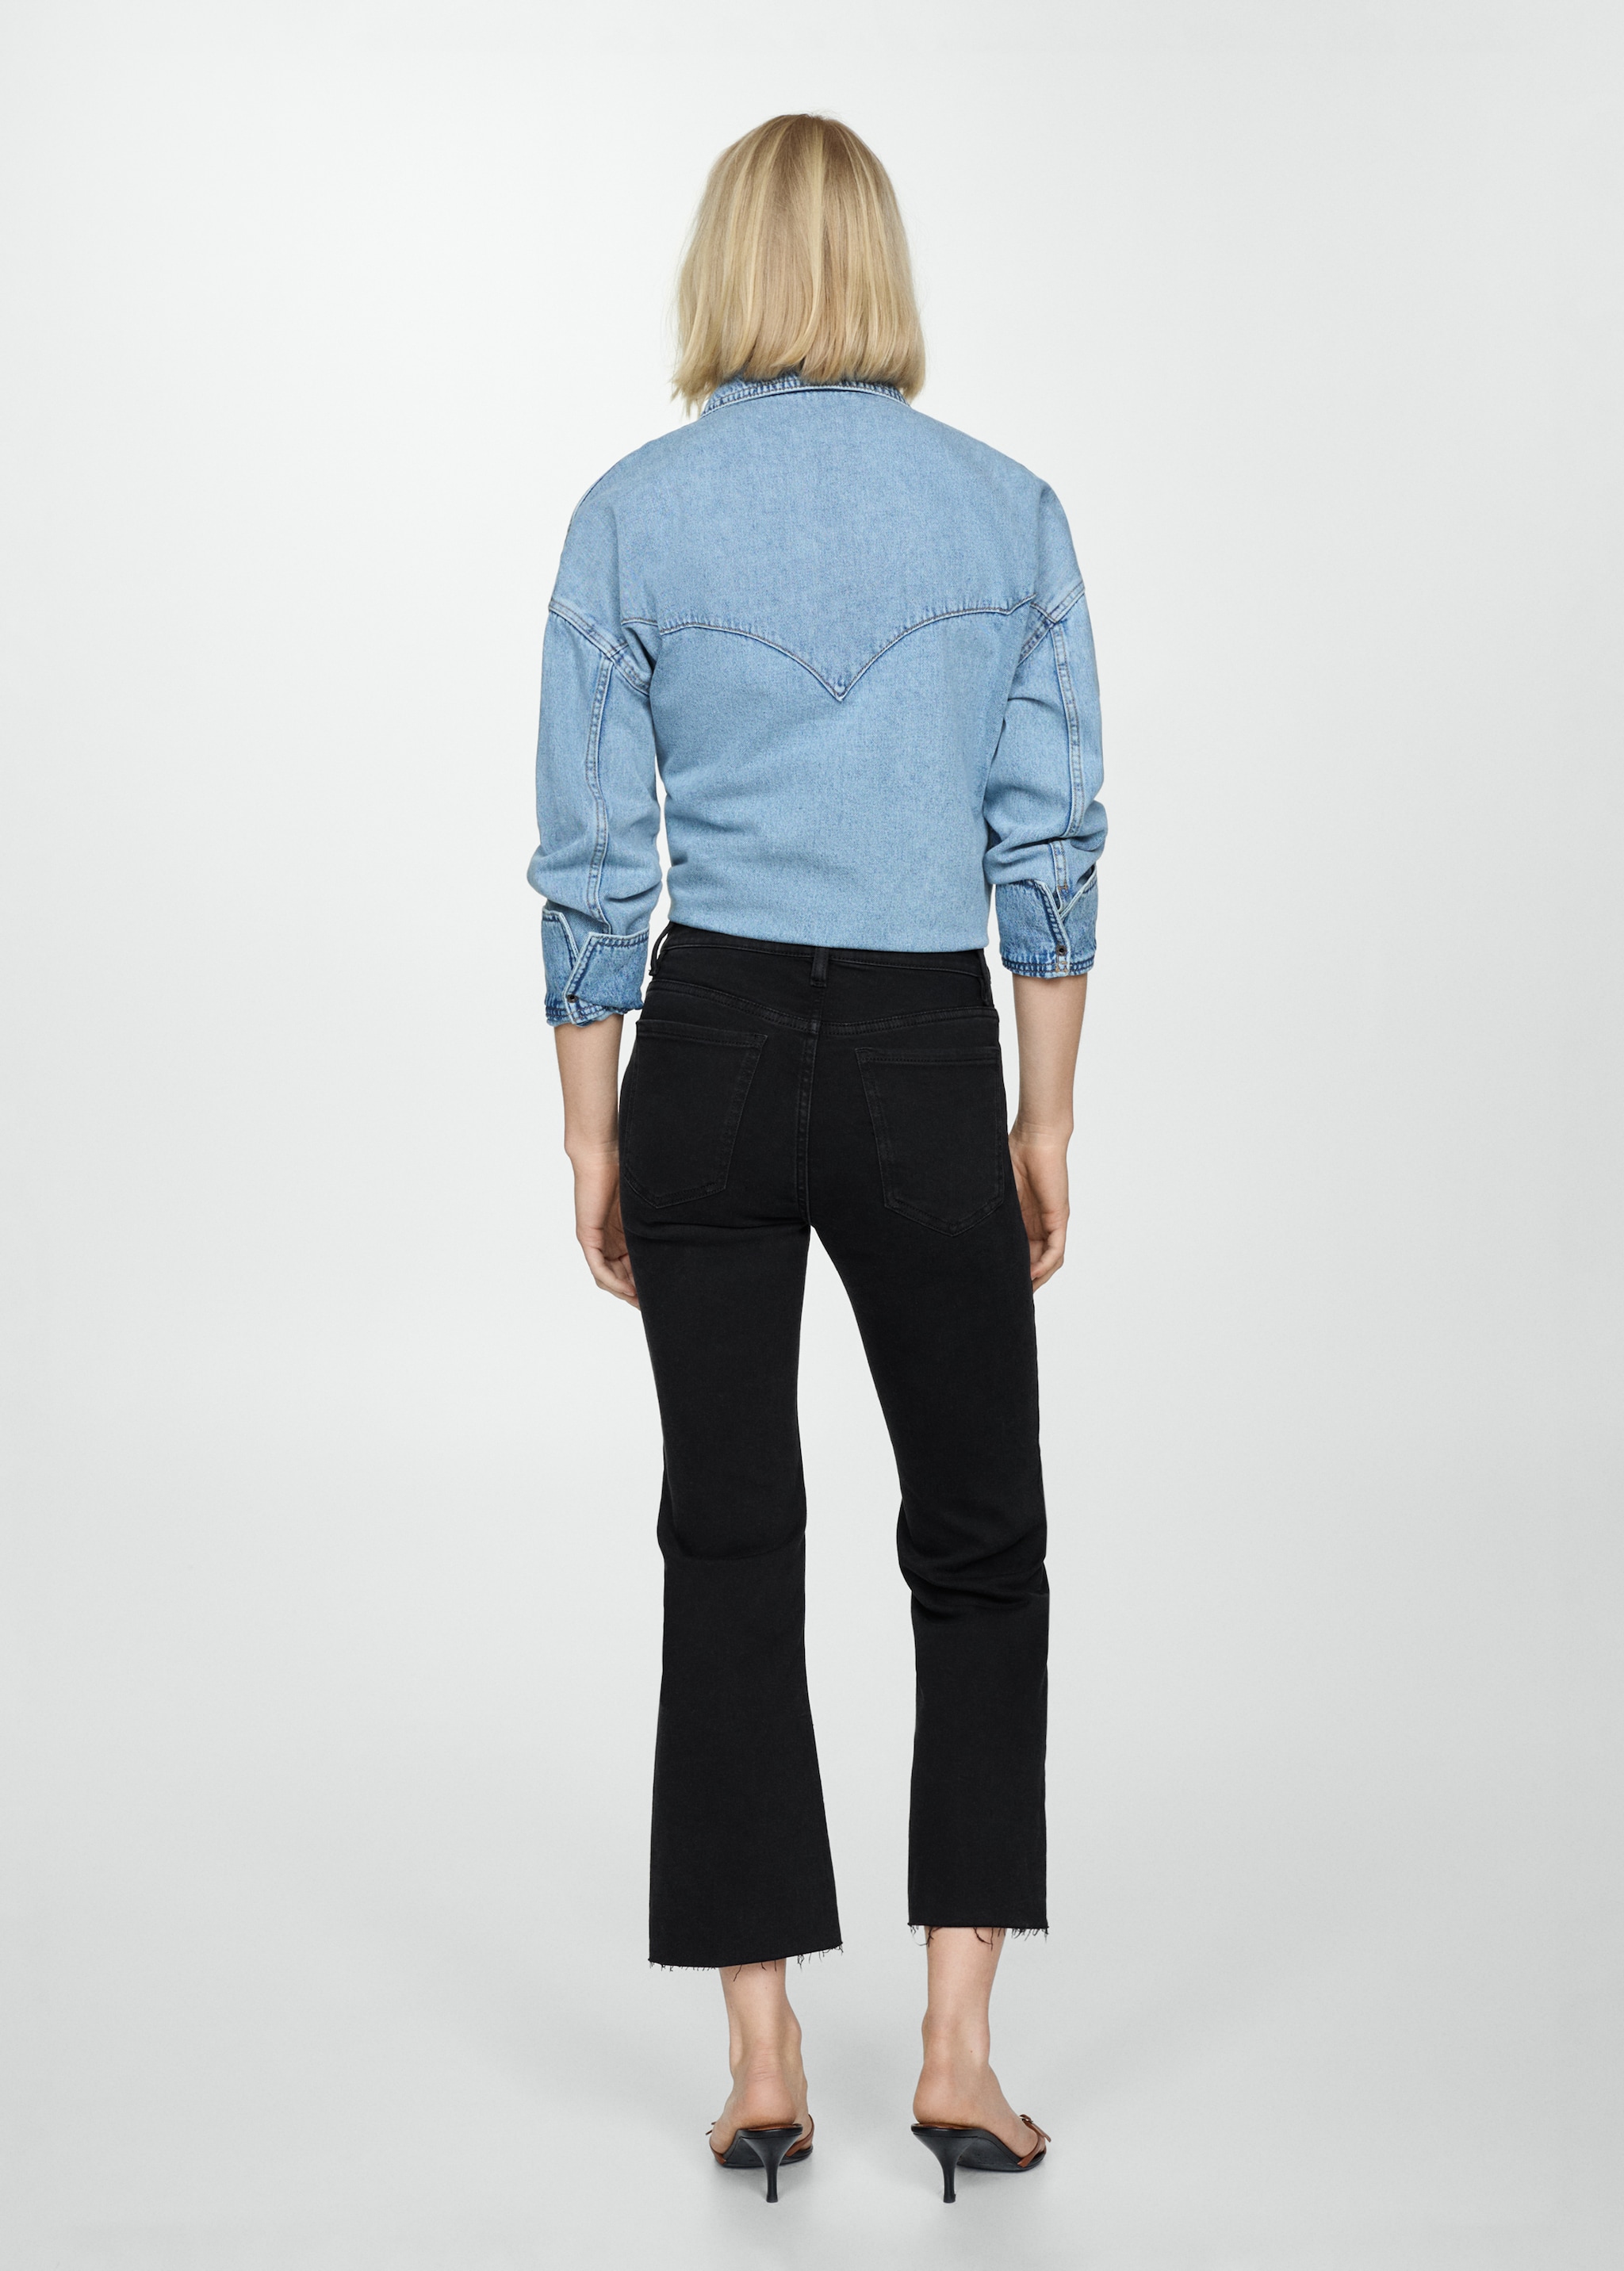 Jeans Sienna flare crop - Reverse of the article